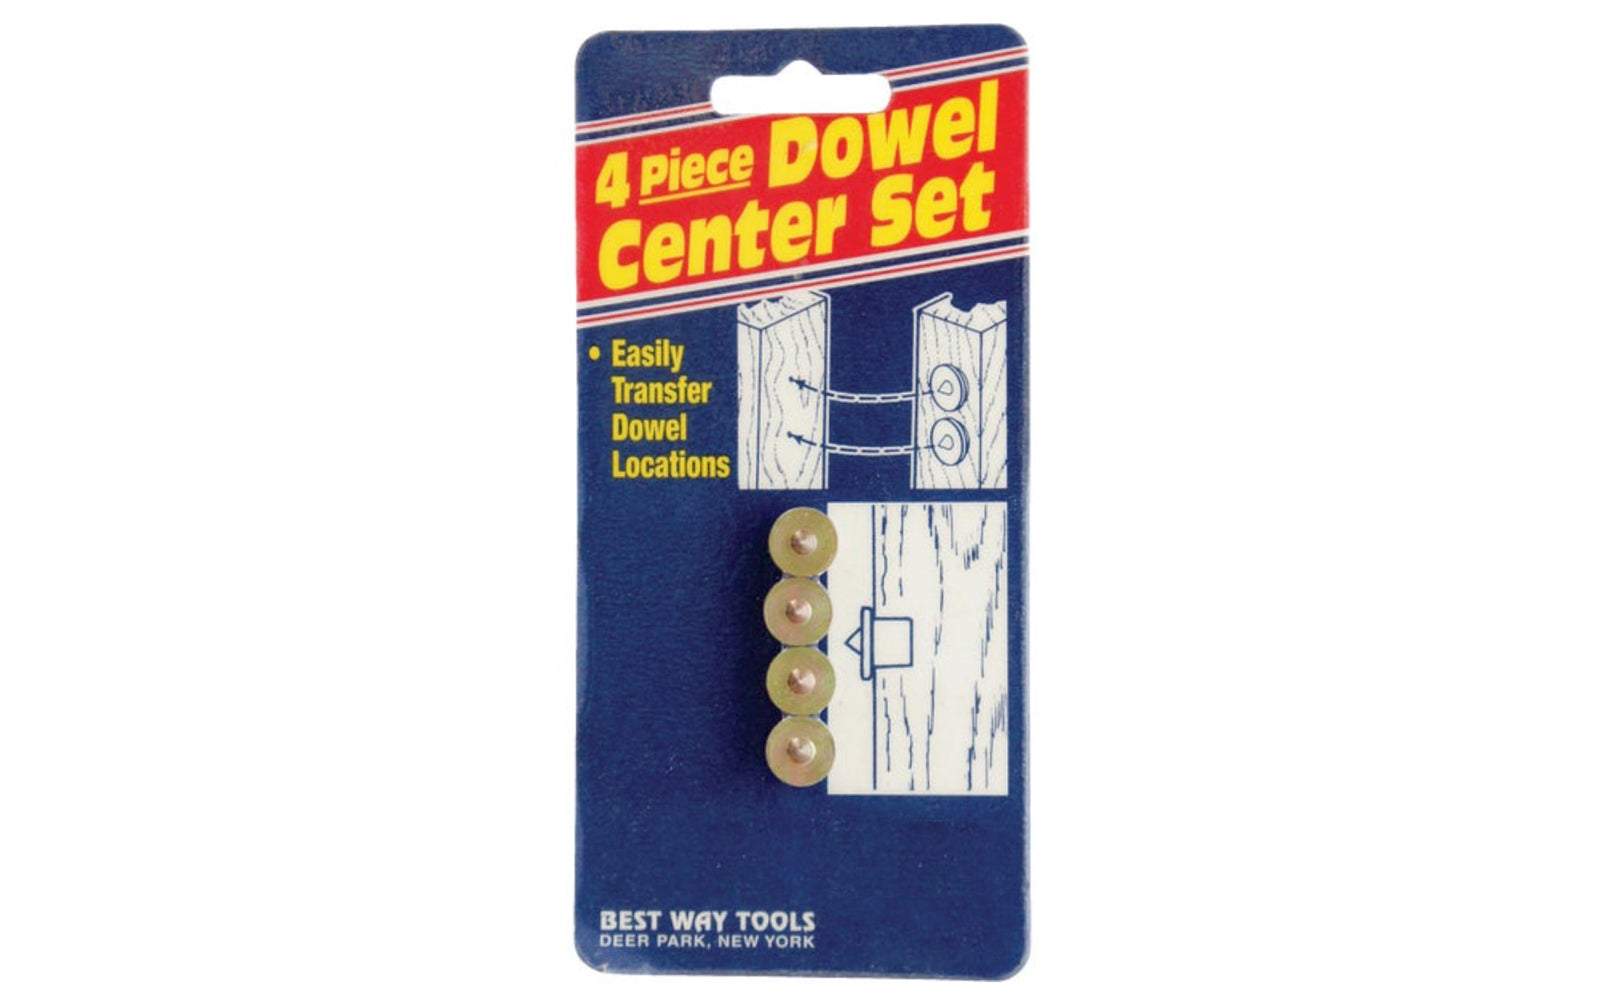 Best Way Tools 1/4" Dowel Centers - 4 PC Set. Makes dowel positioning quick & easy. Accurately marks holes for drilling. Includes 4 centers. Four piece set. Model 25865. 080497258658